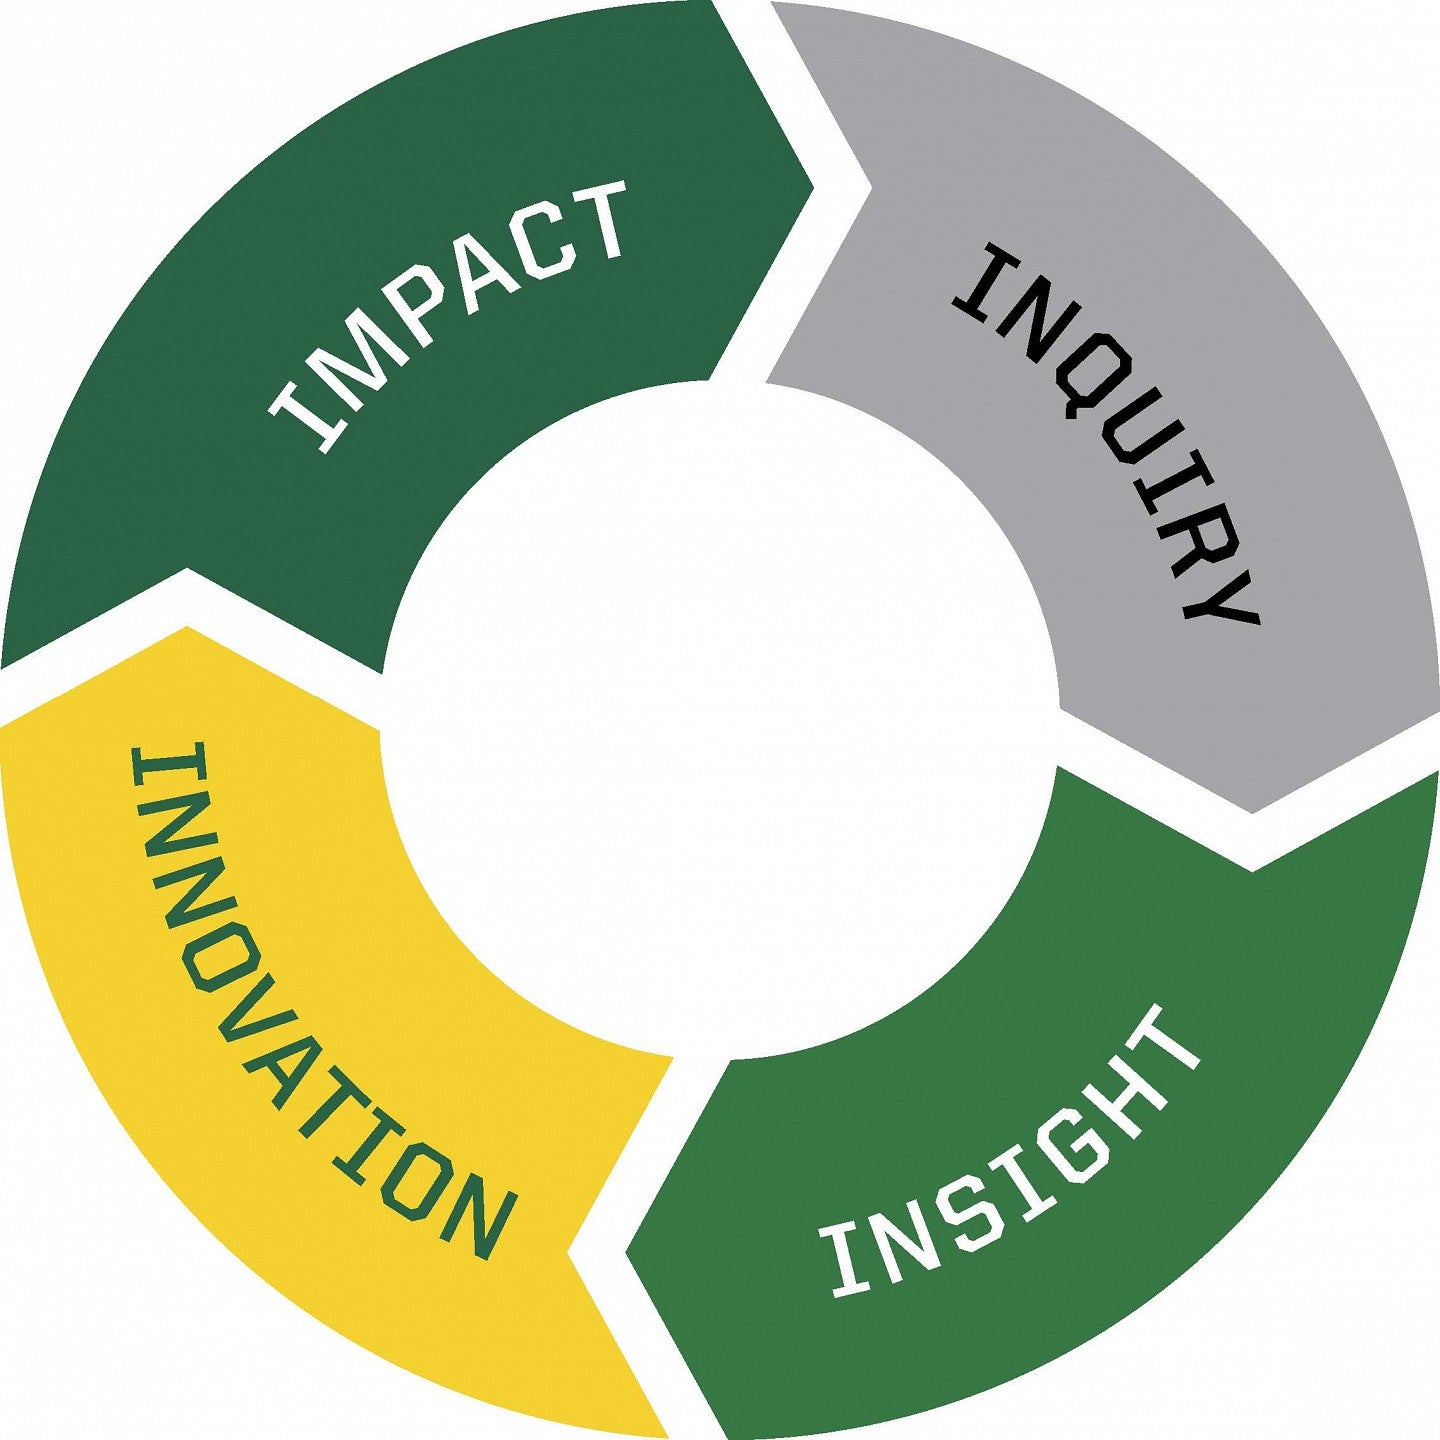 The Impact Cycle: Inquiry > Insight > Innovation > Impact